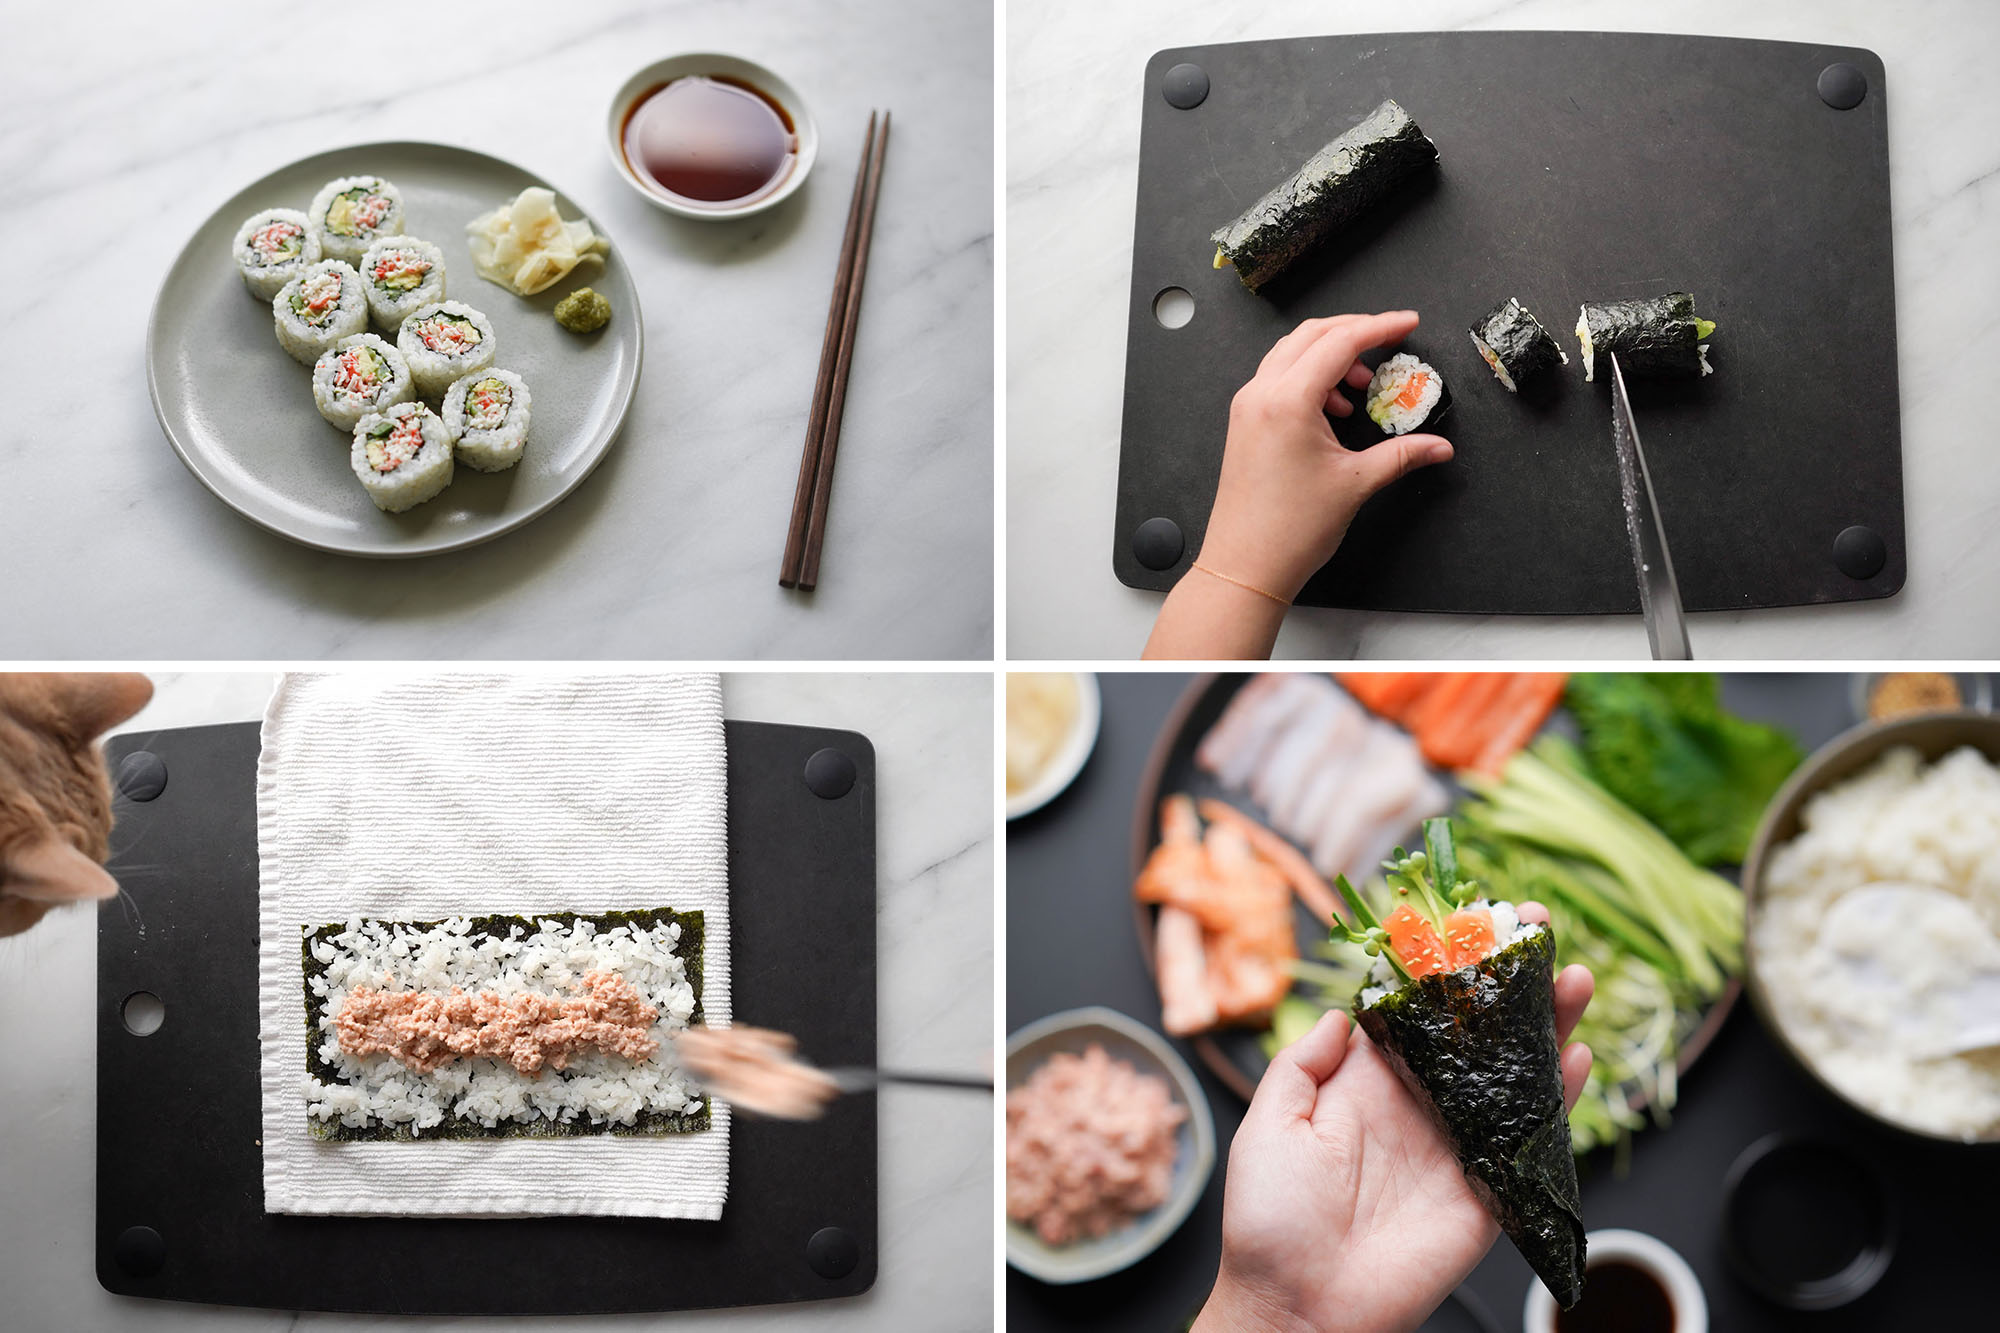 https://www.hungryhuy.com/wp-content/uploads/how-to-roll-sushi.jpg